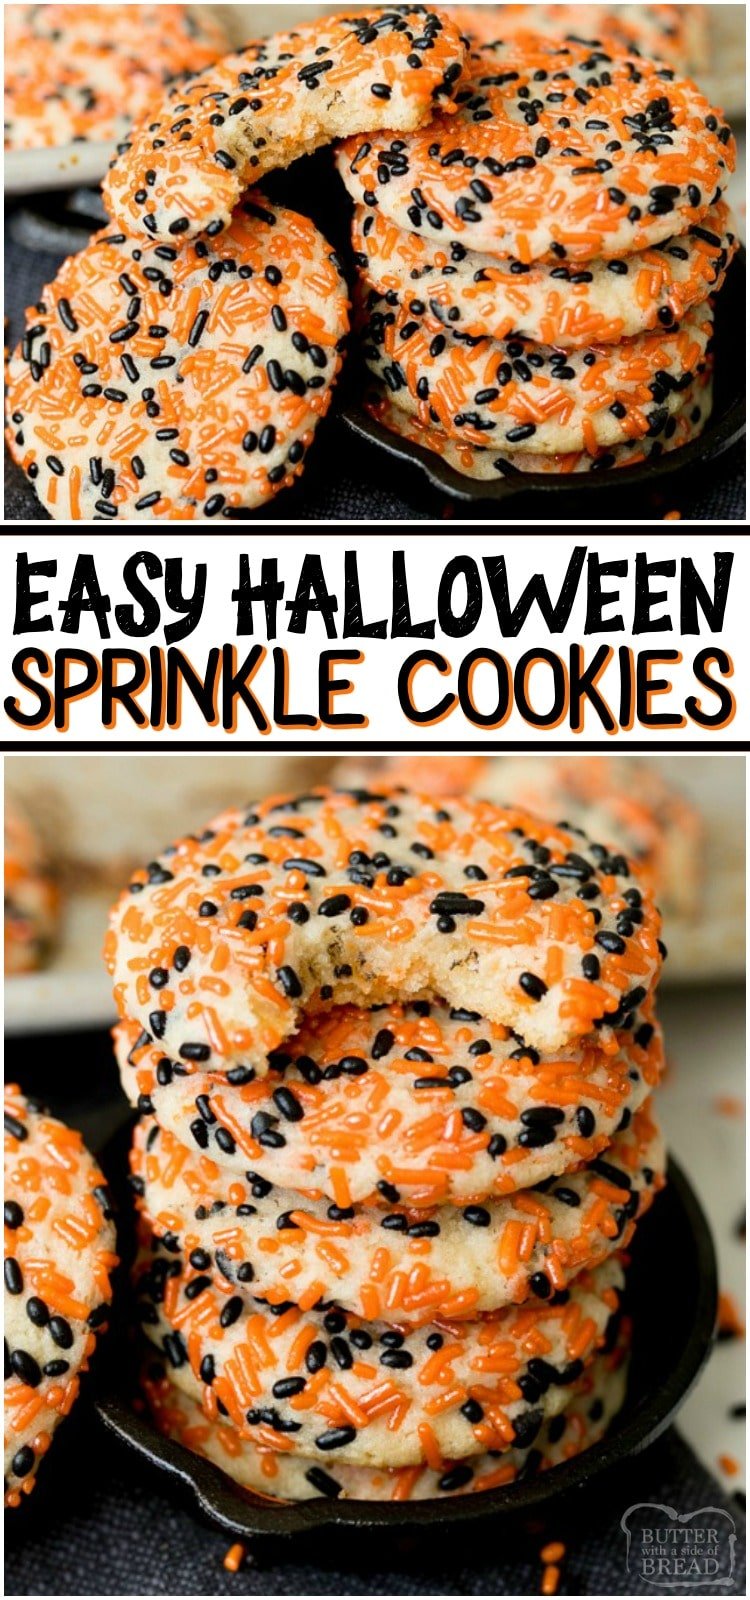 Halloween Sprinkle Cookies are a festive & sweet way to celebrate Halloween! Soft, easy Halloween cookie recipe covered in orange and black sprinkles then baked to cookie perfection.